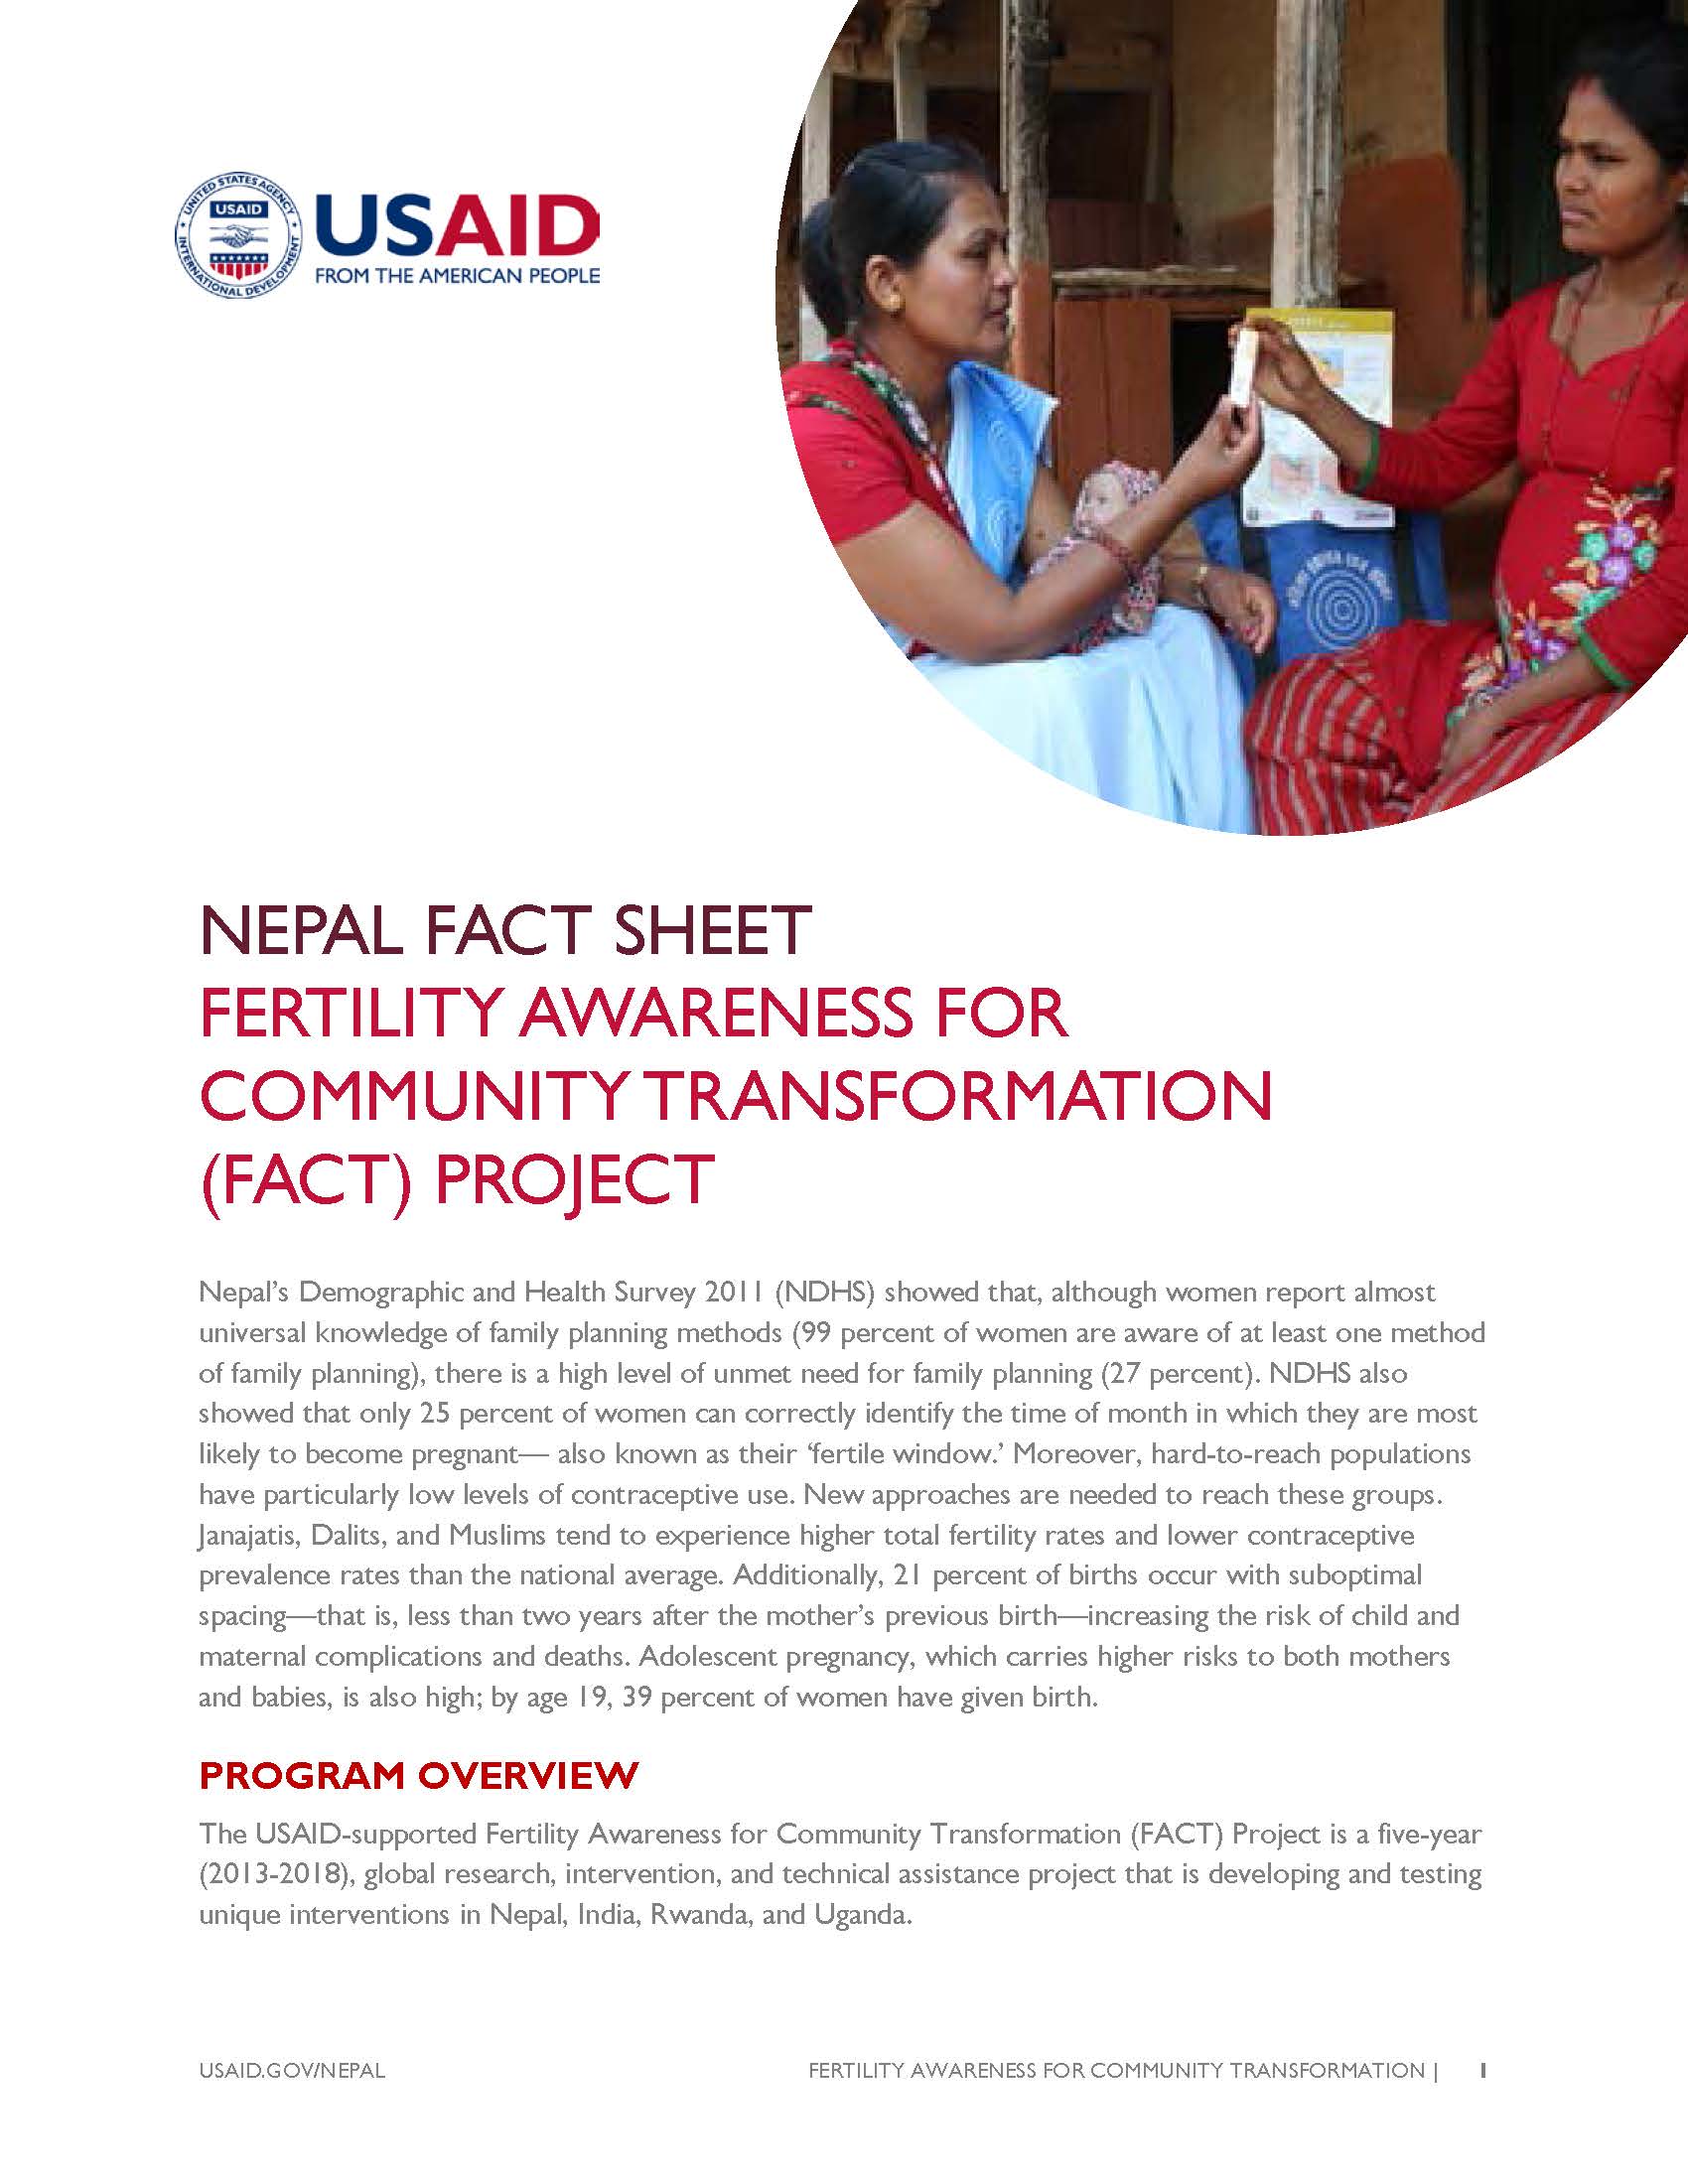 FACTSHEET:  FERTILITY AWARENESS FOR COMMUNITY TRANSFORMATION (FACT) PROJECT